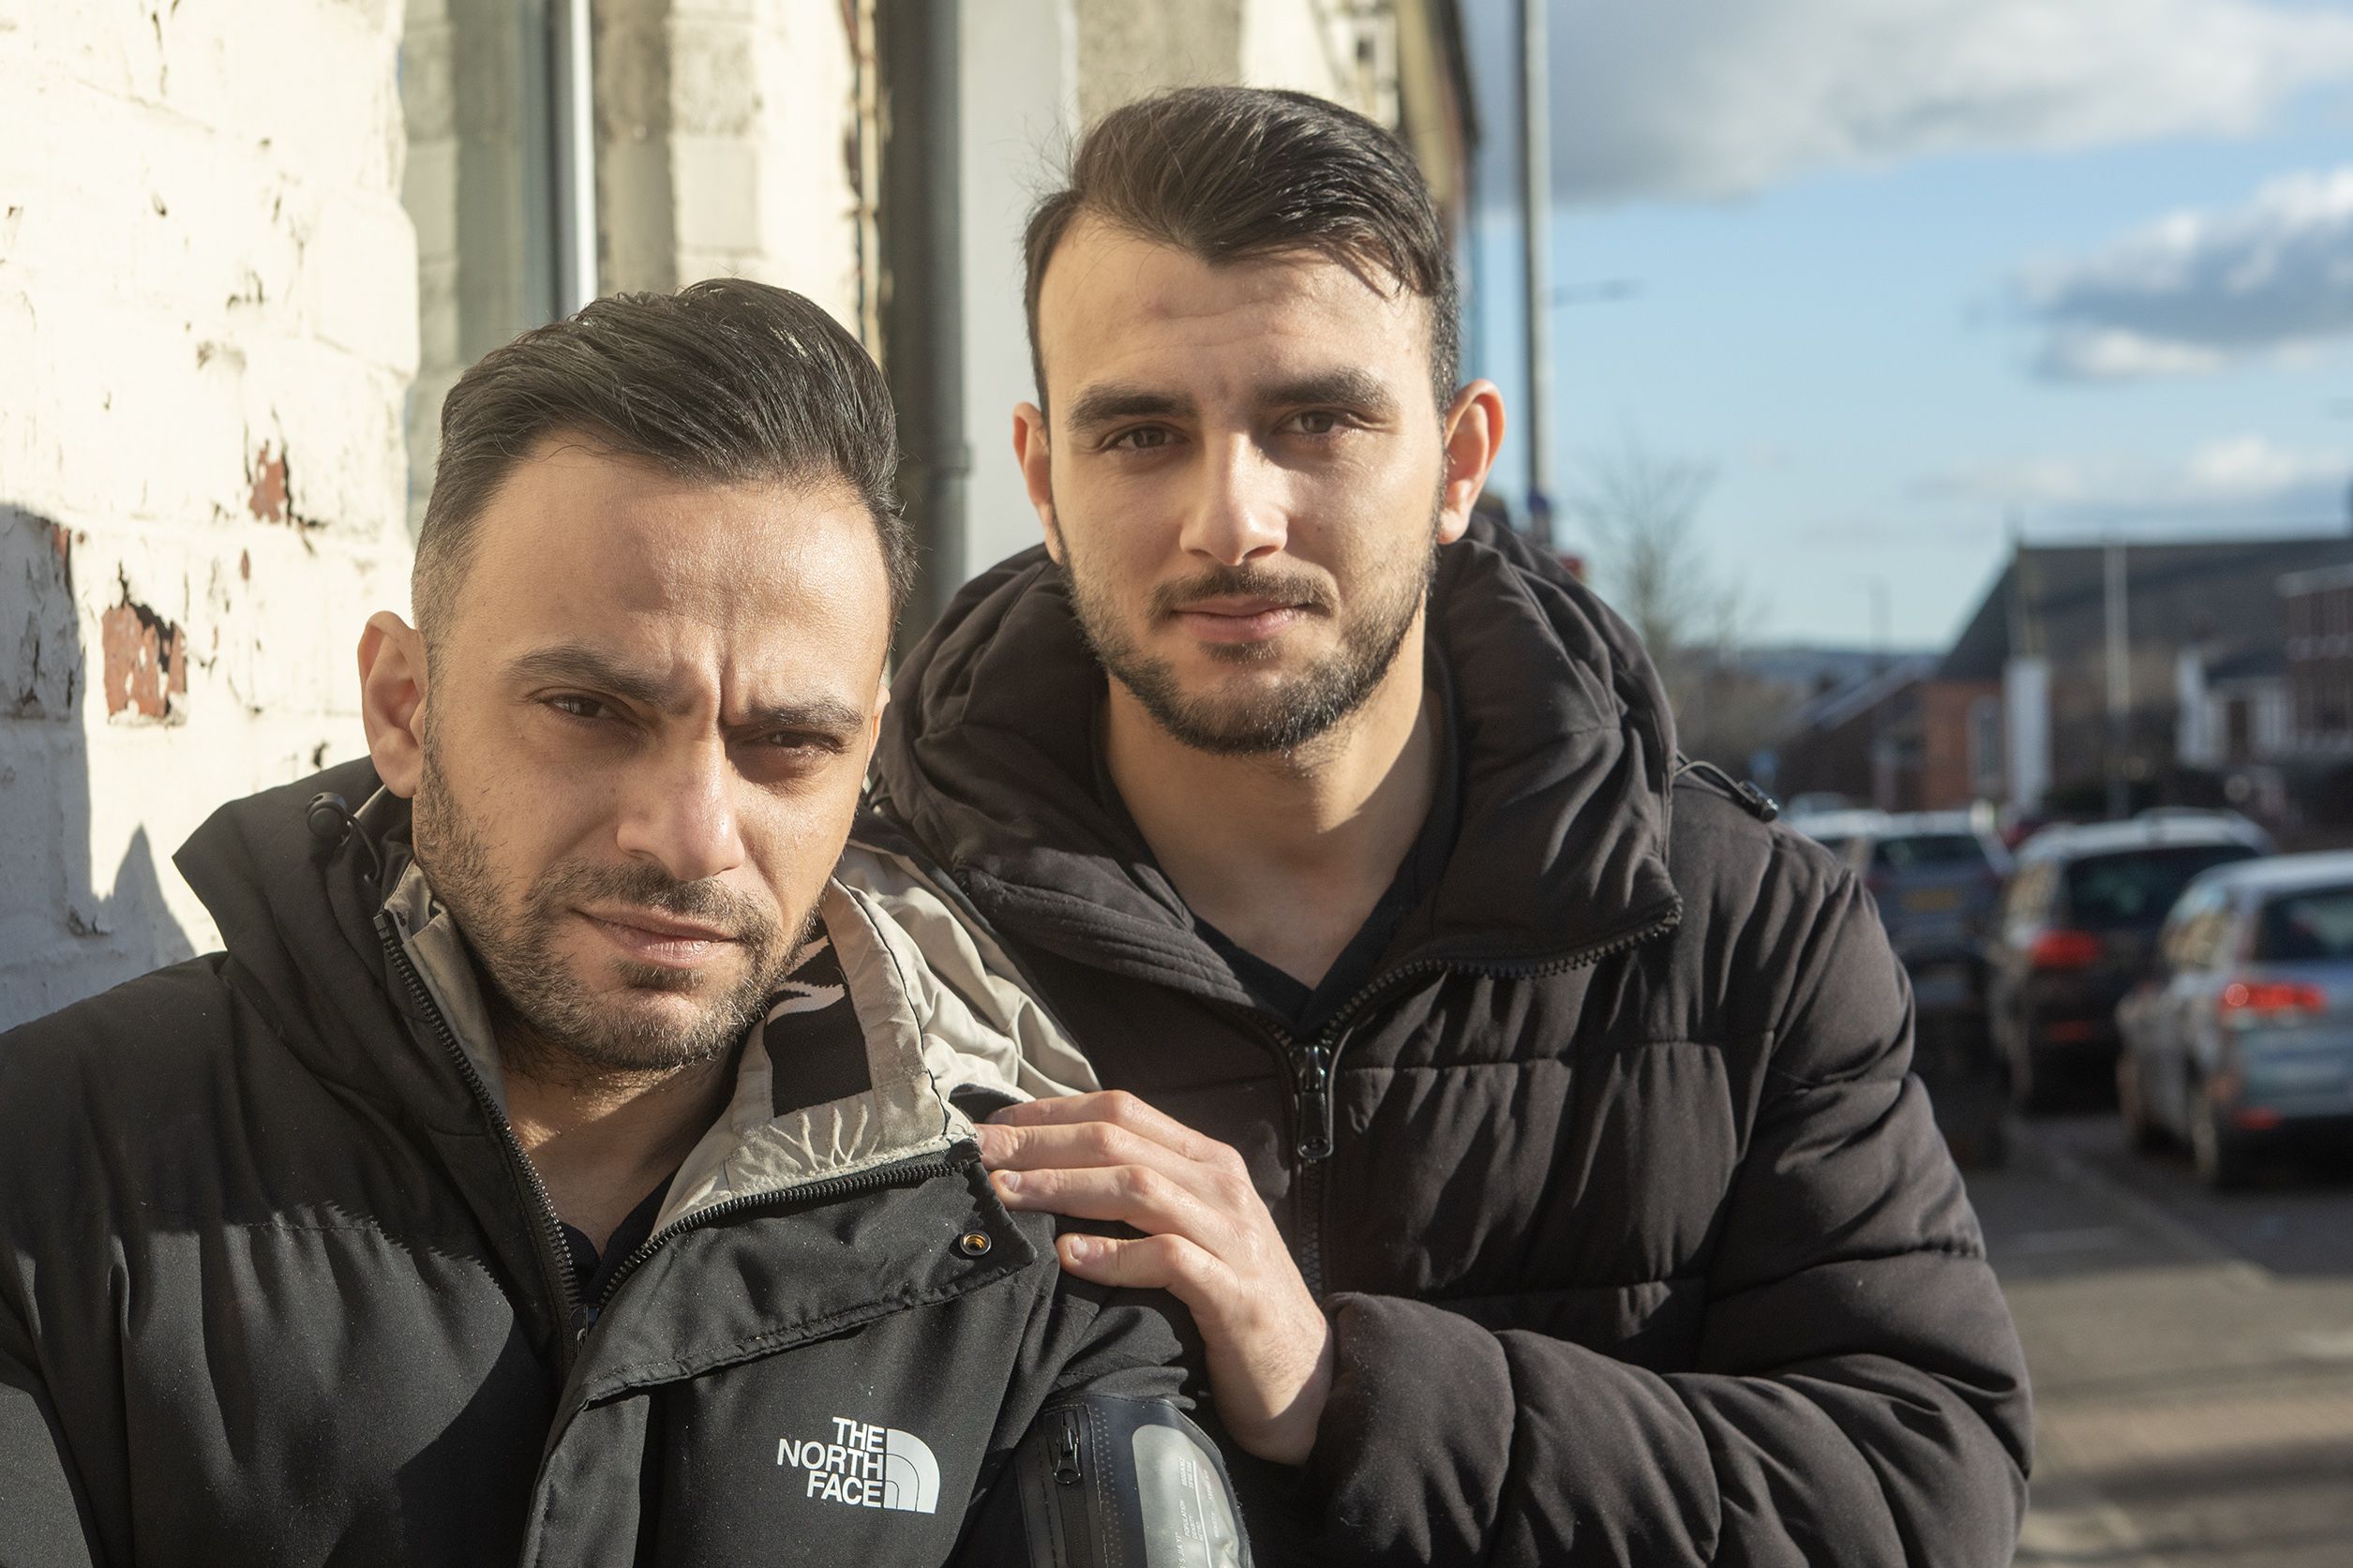 CAMPAIGN: Brothers Hashem Jouda and Alaa Alraee are trying to help their family back in Gaza